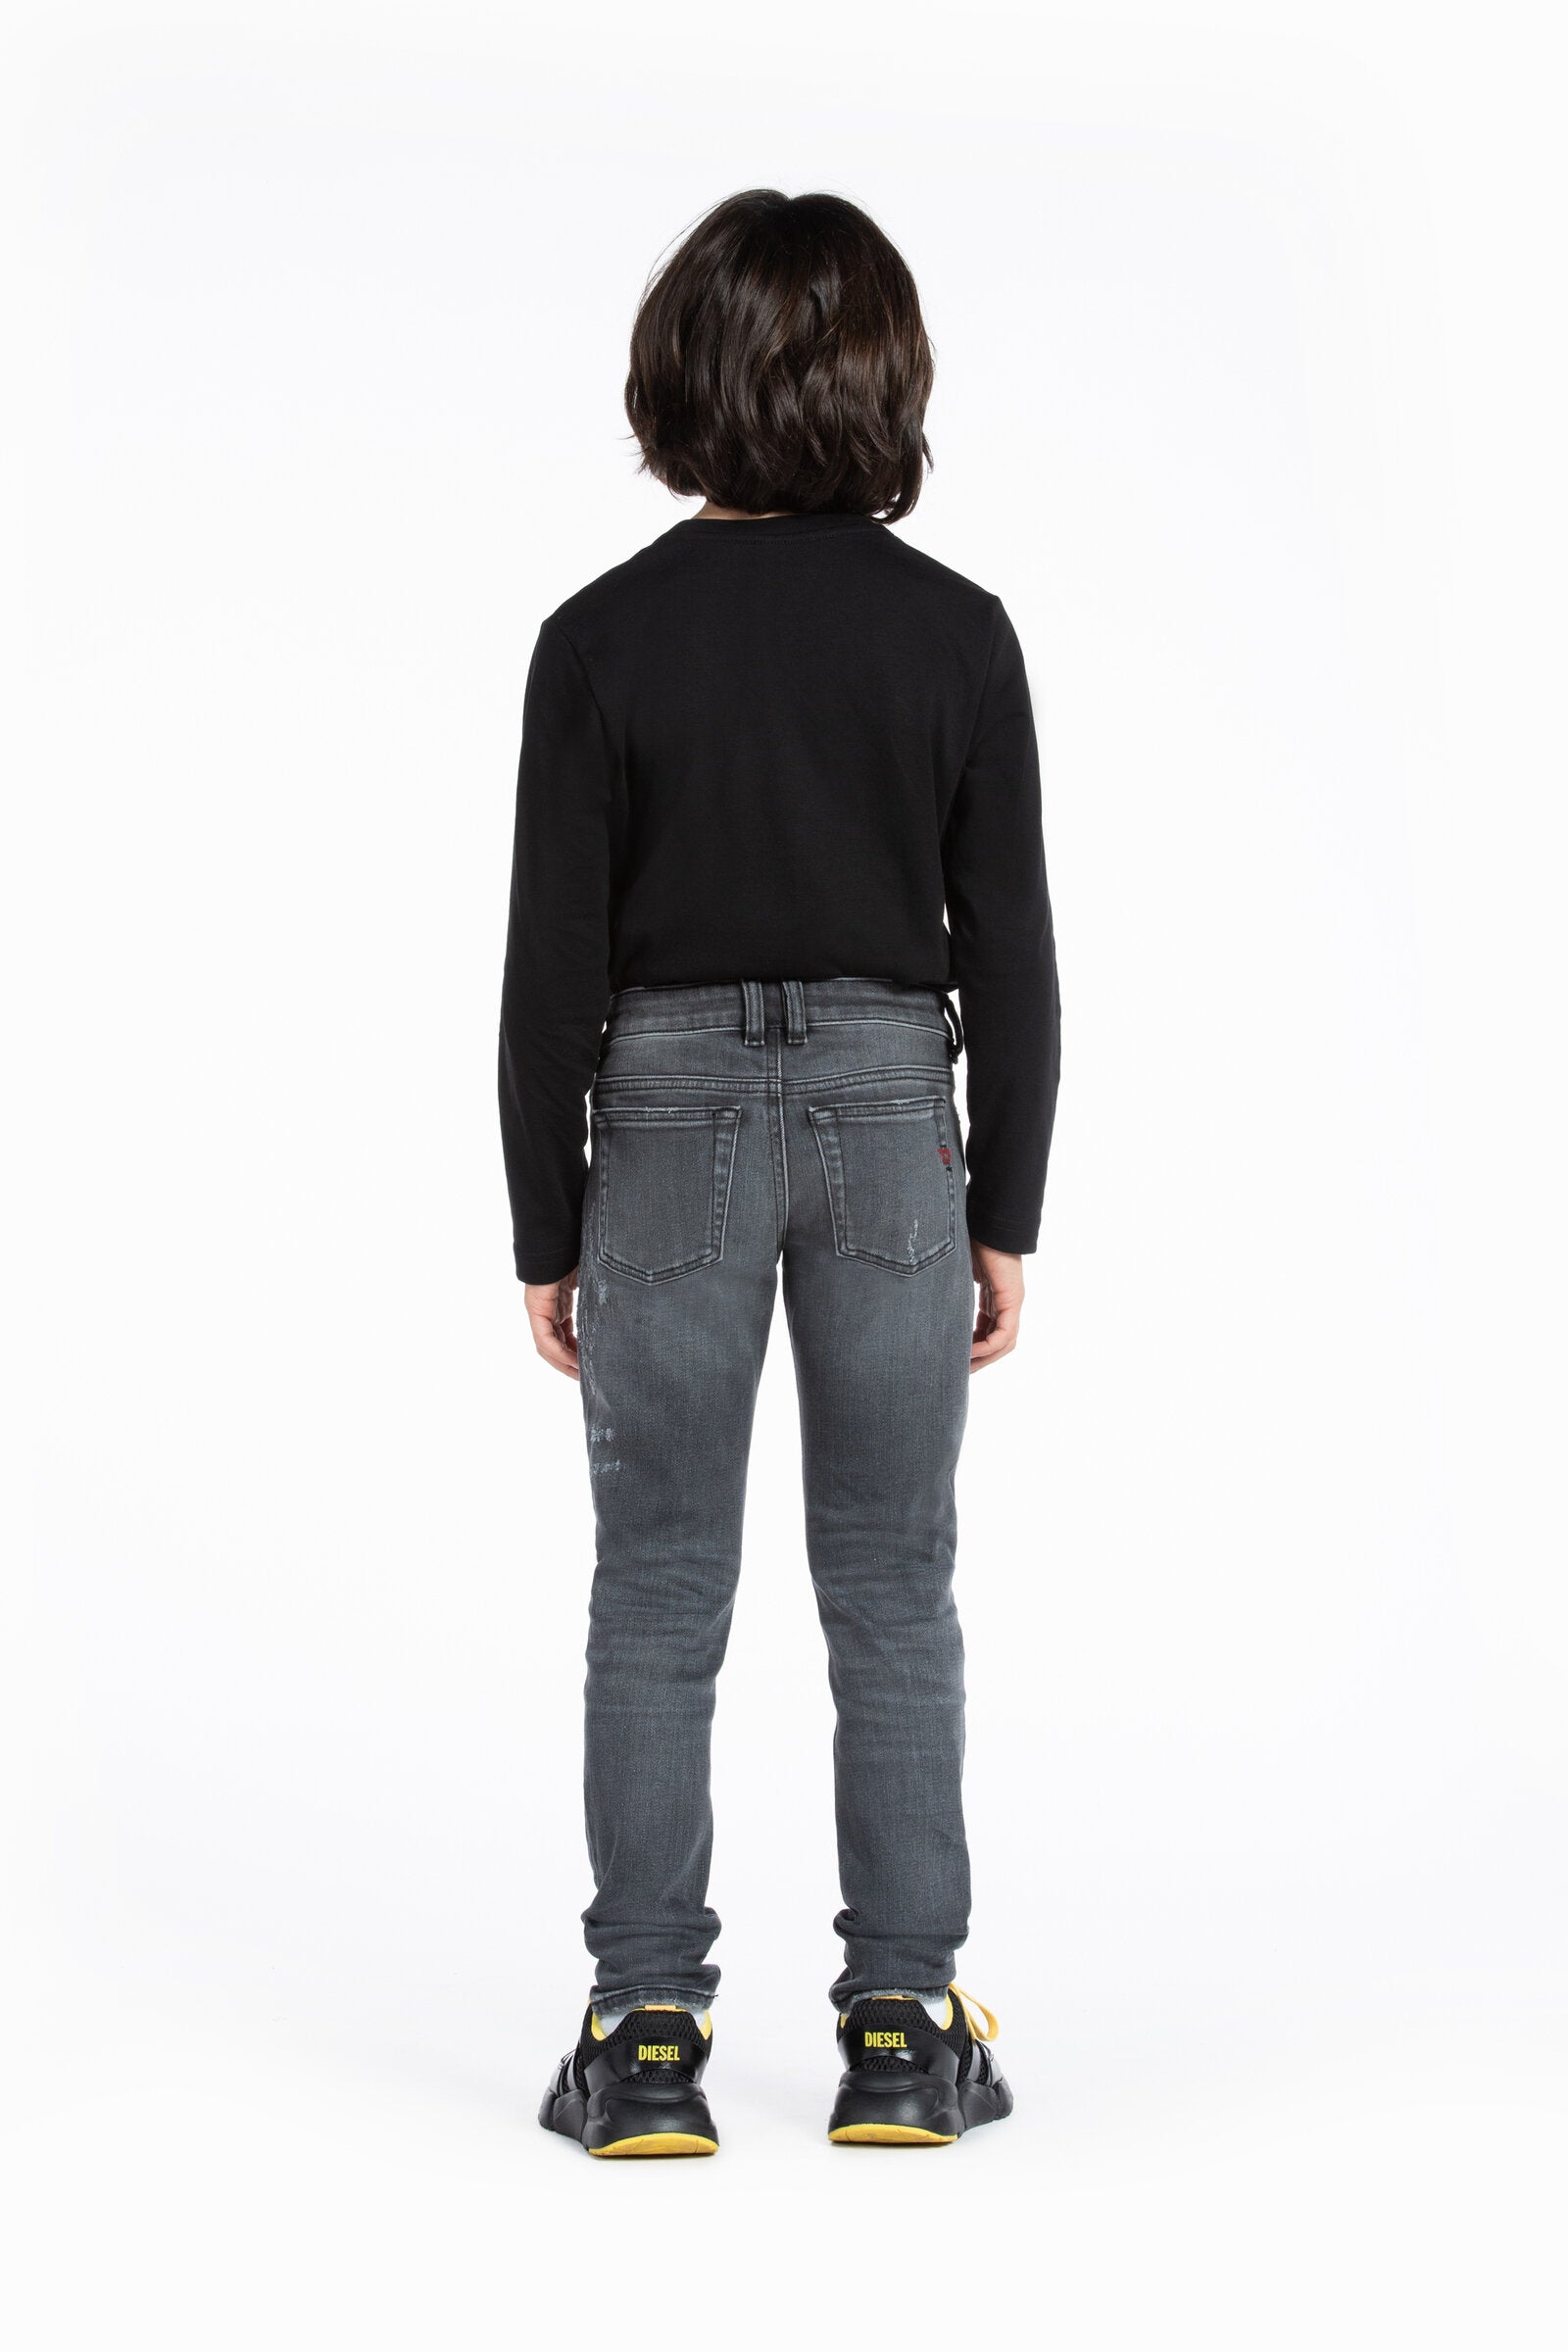 Jeans 1979 Sleenker skinny black jeans with patches